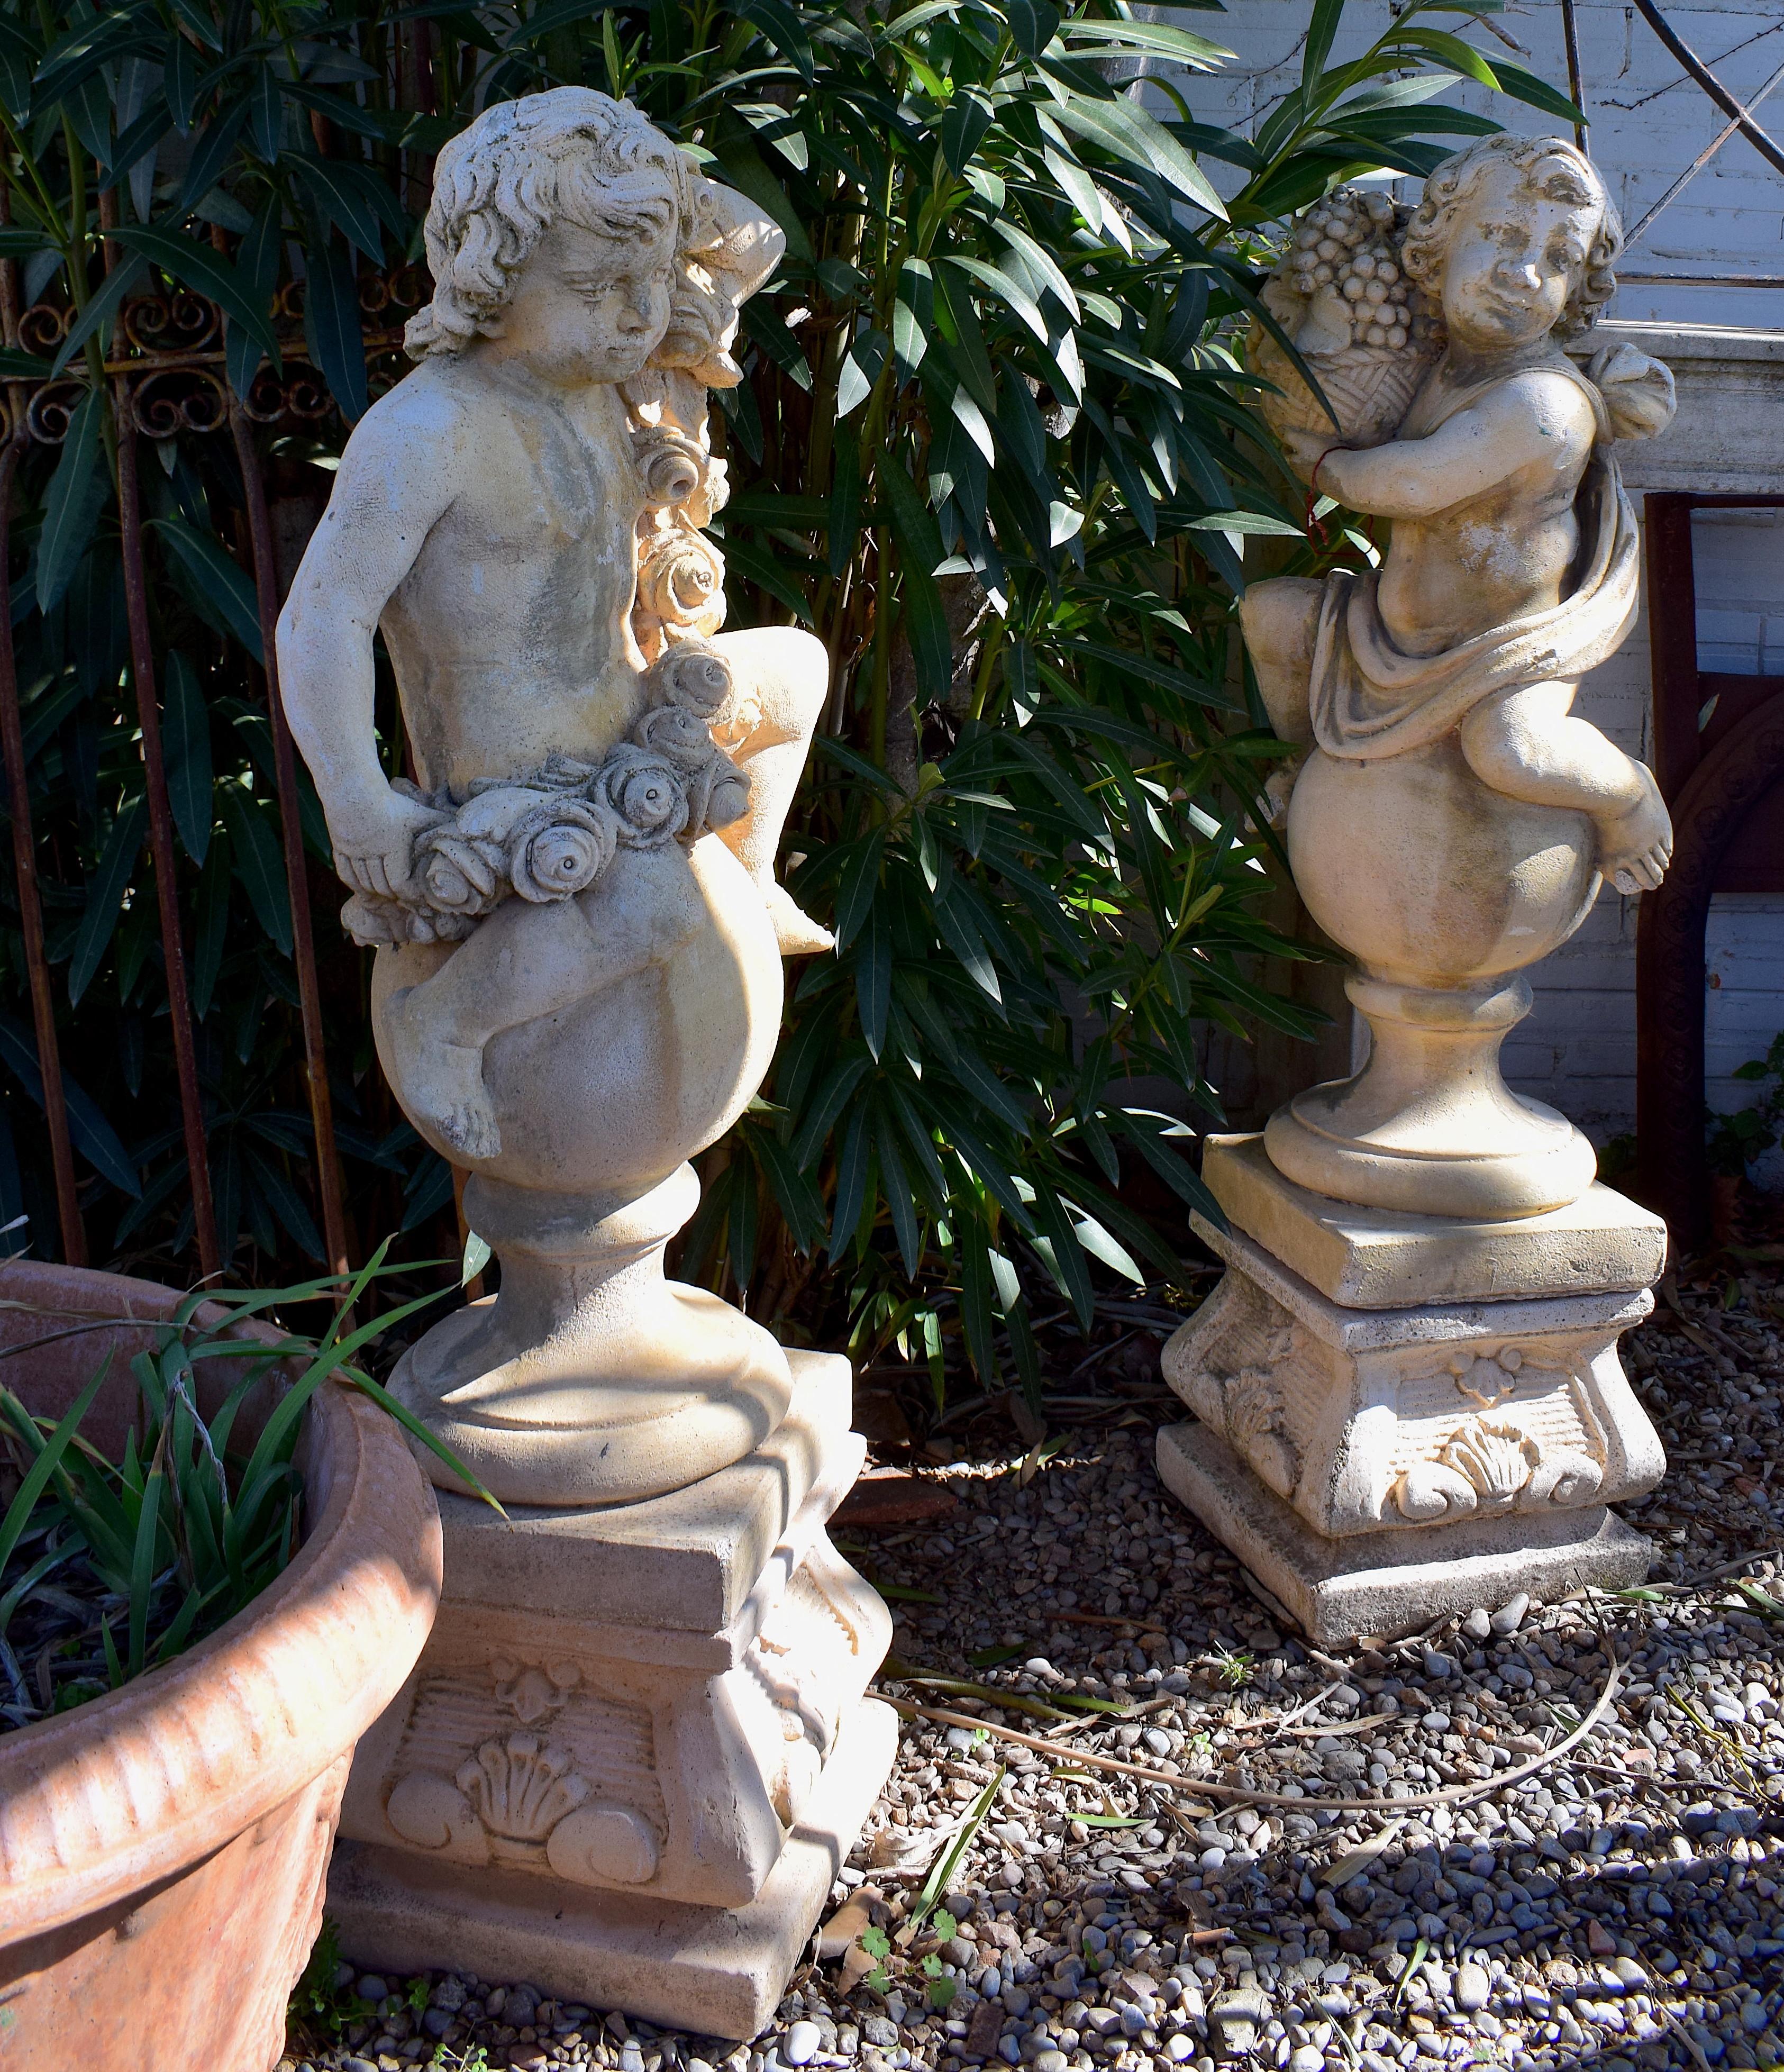 A pair of cherubs stood on plinths, these heavy jardinieres are in a good condition. They have beautiful detail and are classical designed garden ornaments. One cherub is holding grapes whilst the second is clutching a bunch of flowers. The cherub